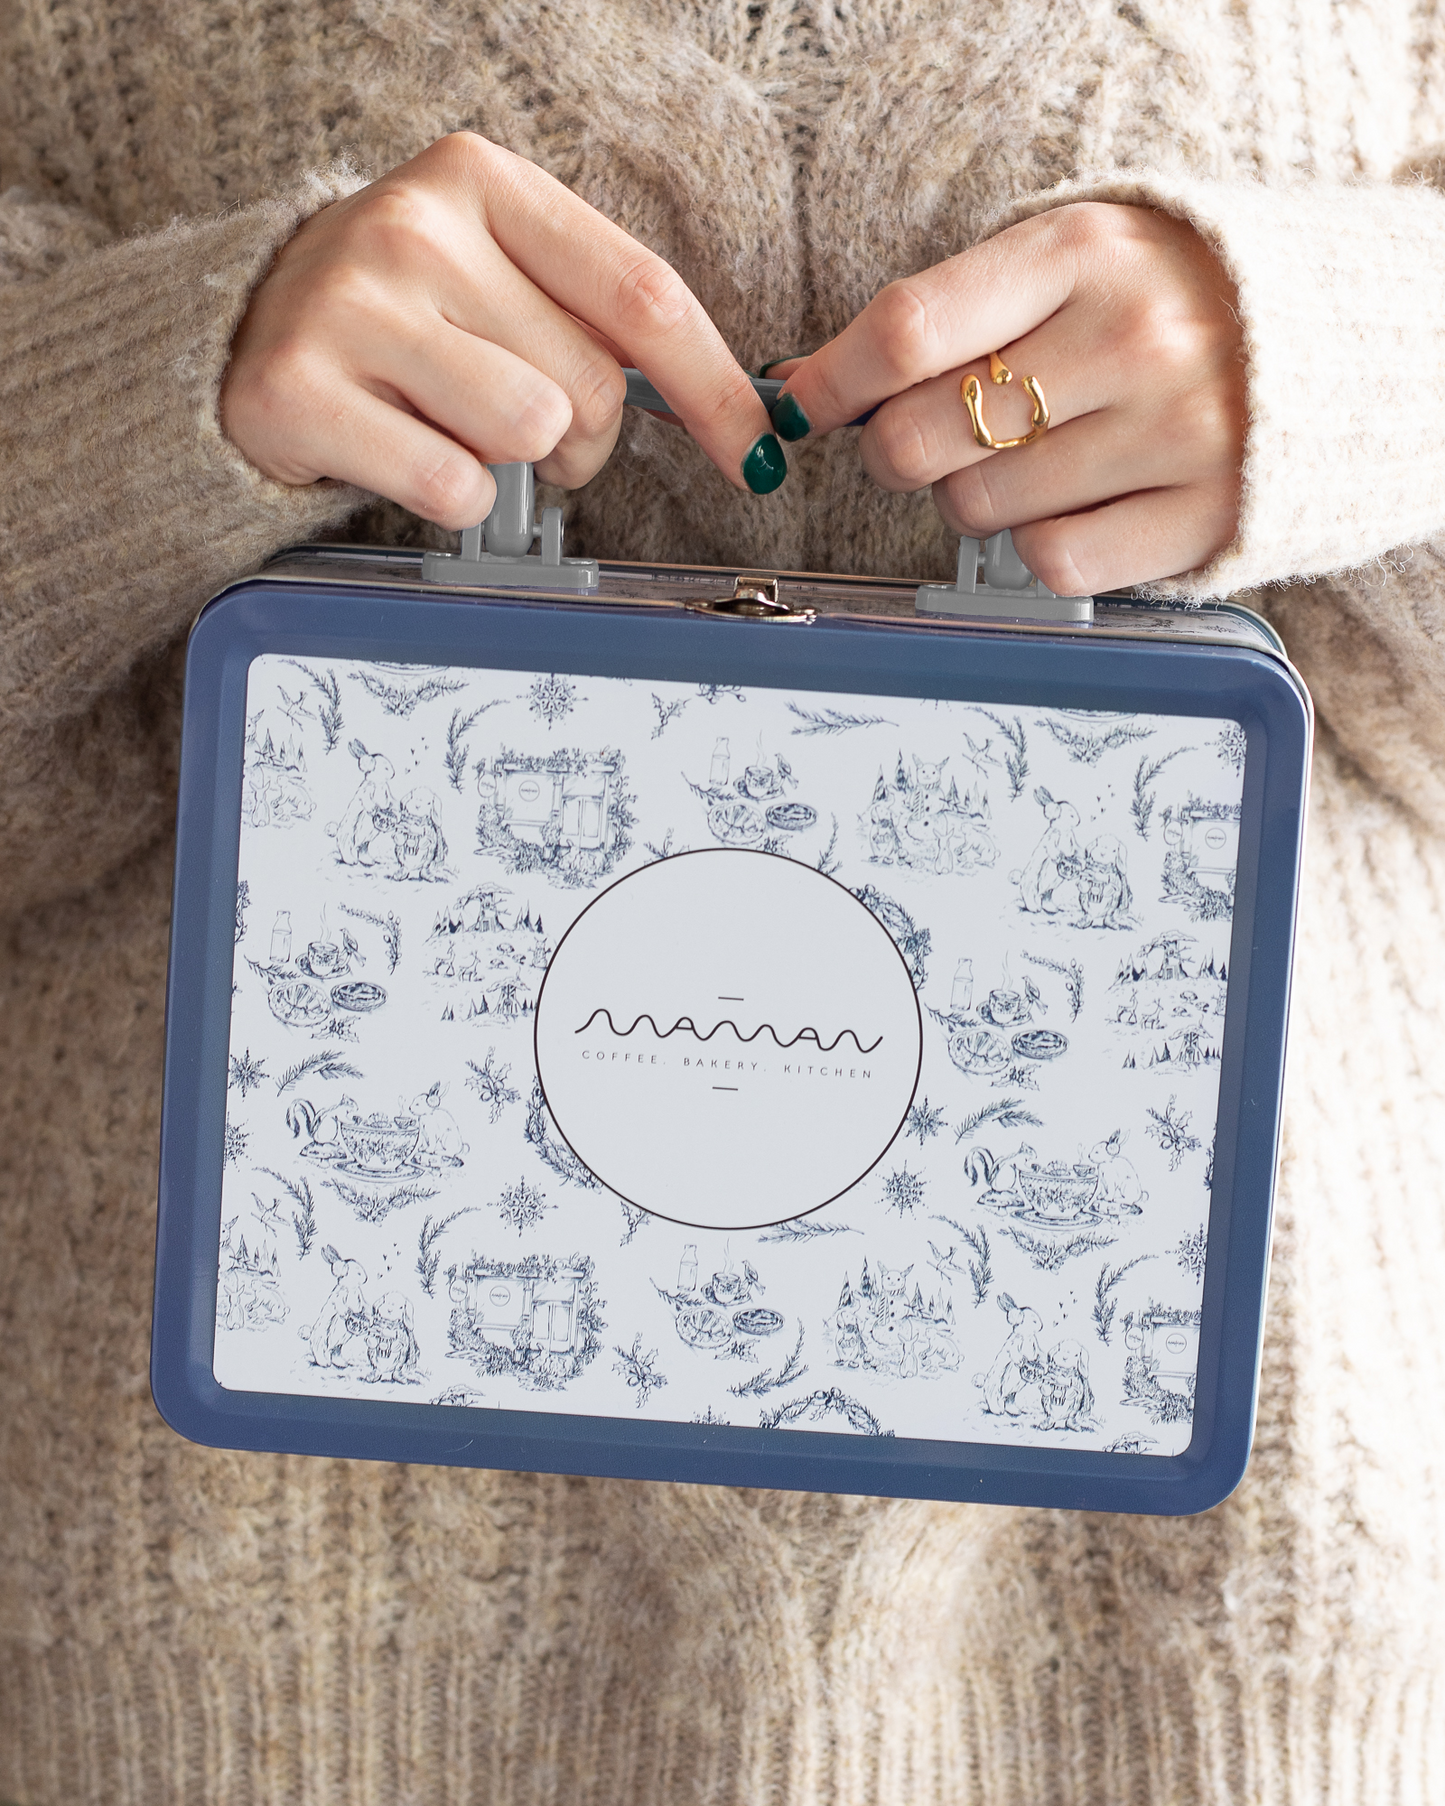 {limited edition} maman tin lunch box